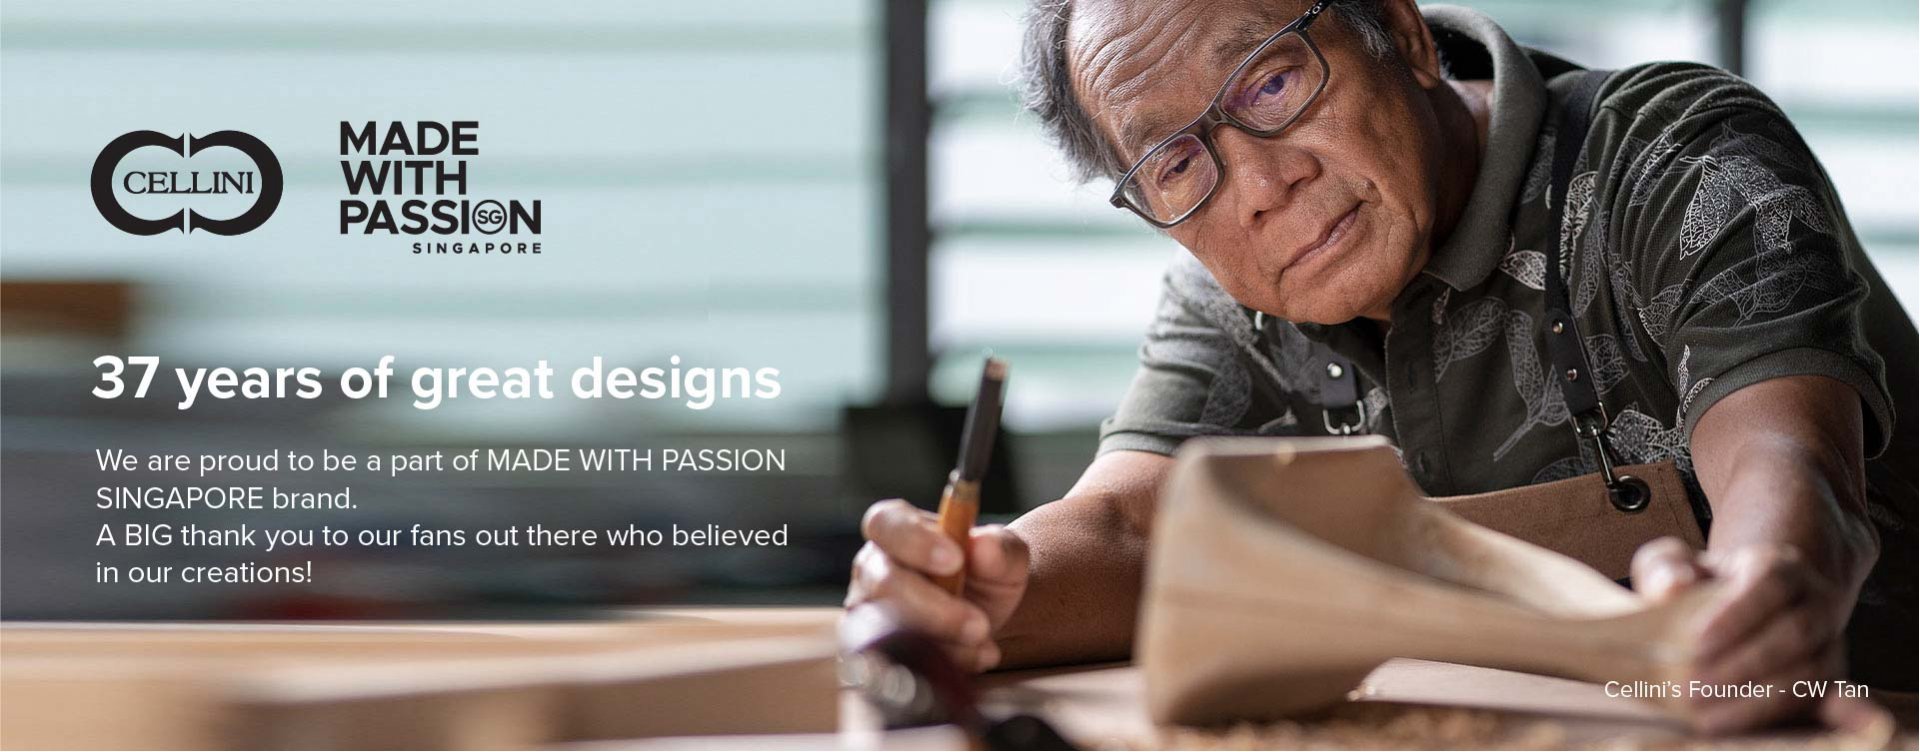 Made with Passion Singapore